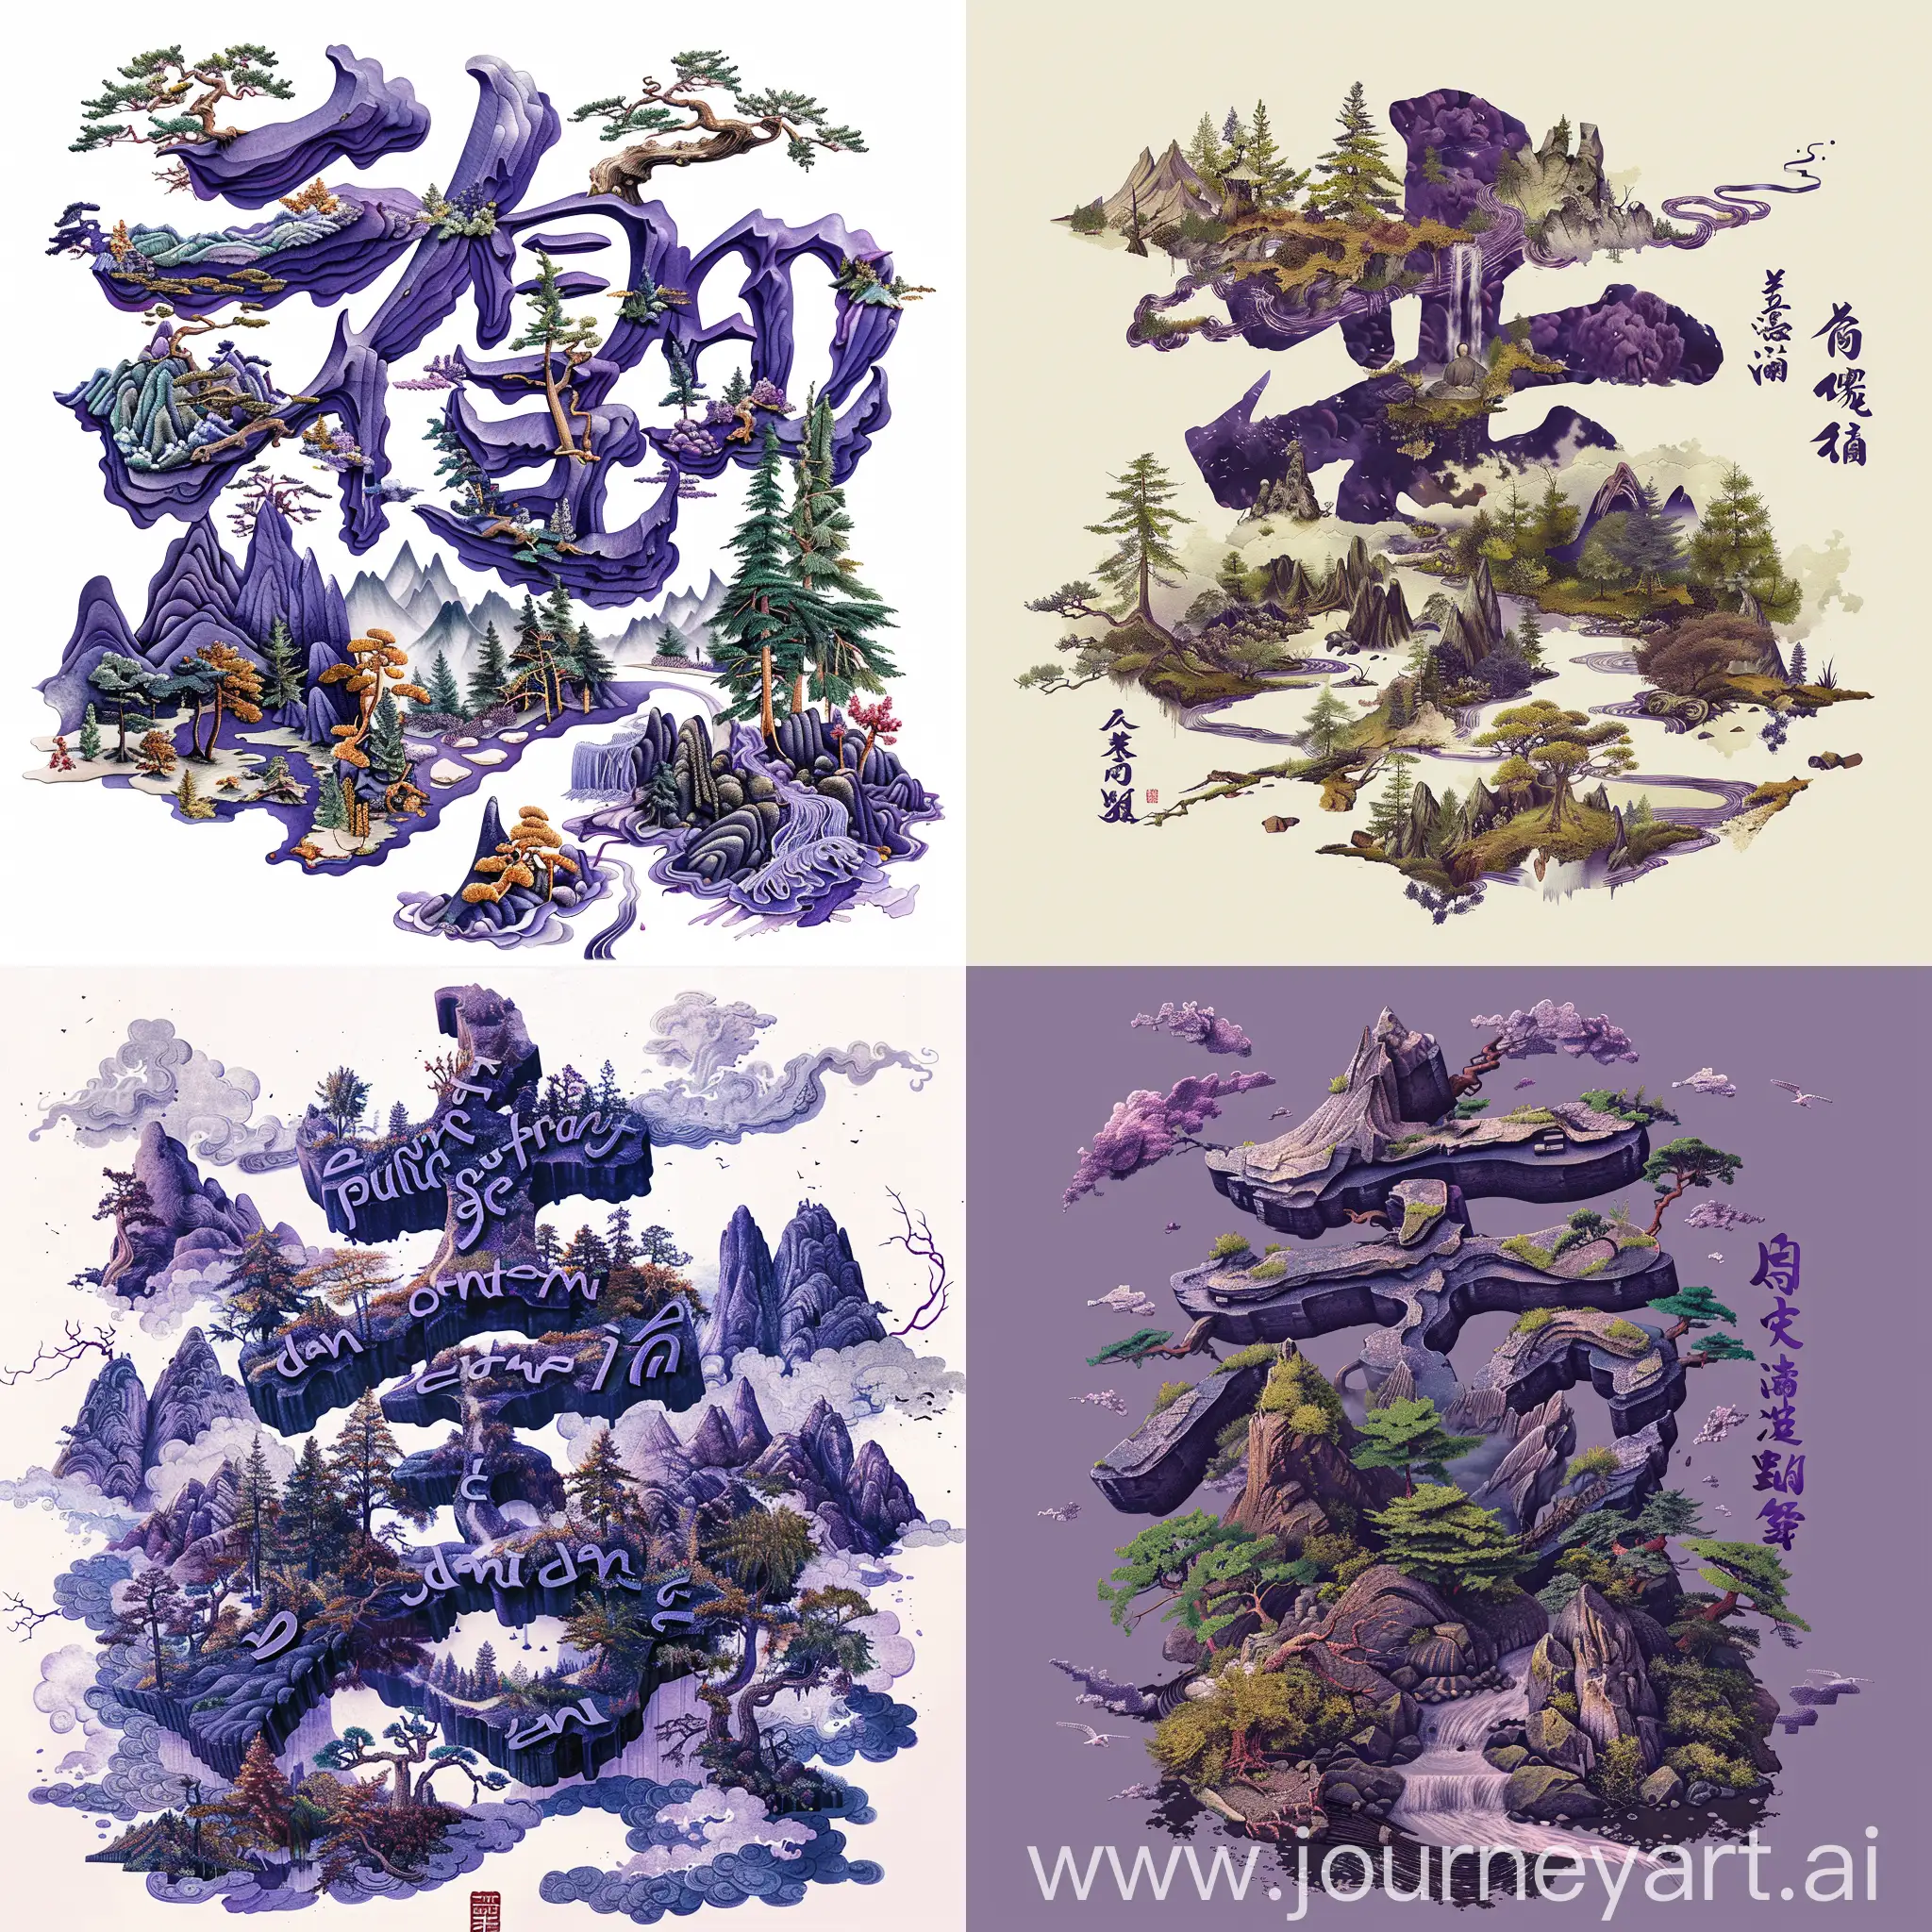 Dan-Character-Formed-by-Strange-Mountains-Rivers-and-Trees-in-Purple-Qi-Setting